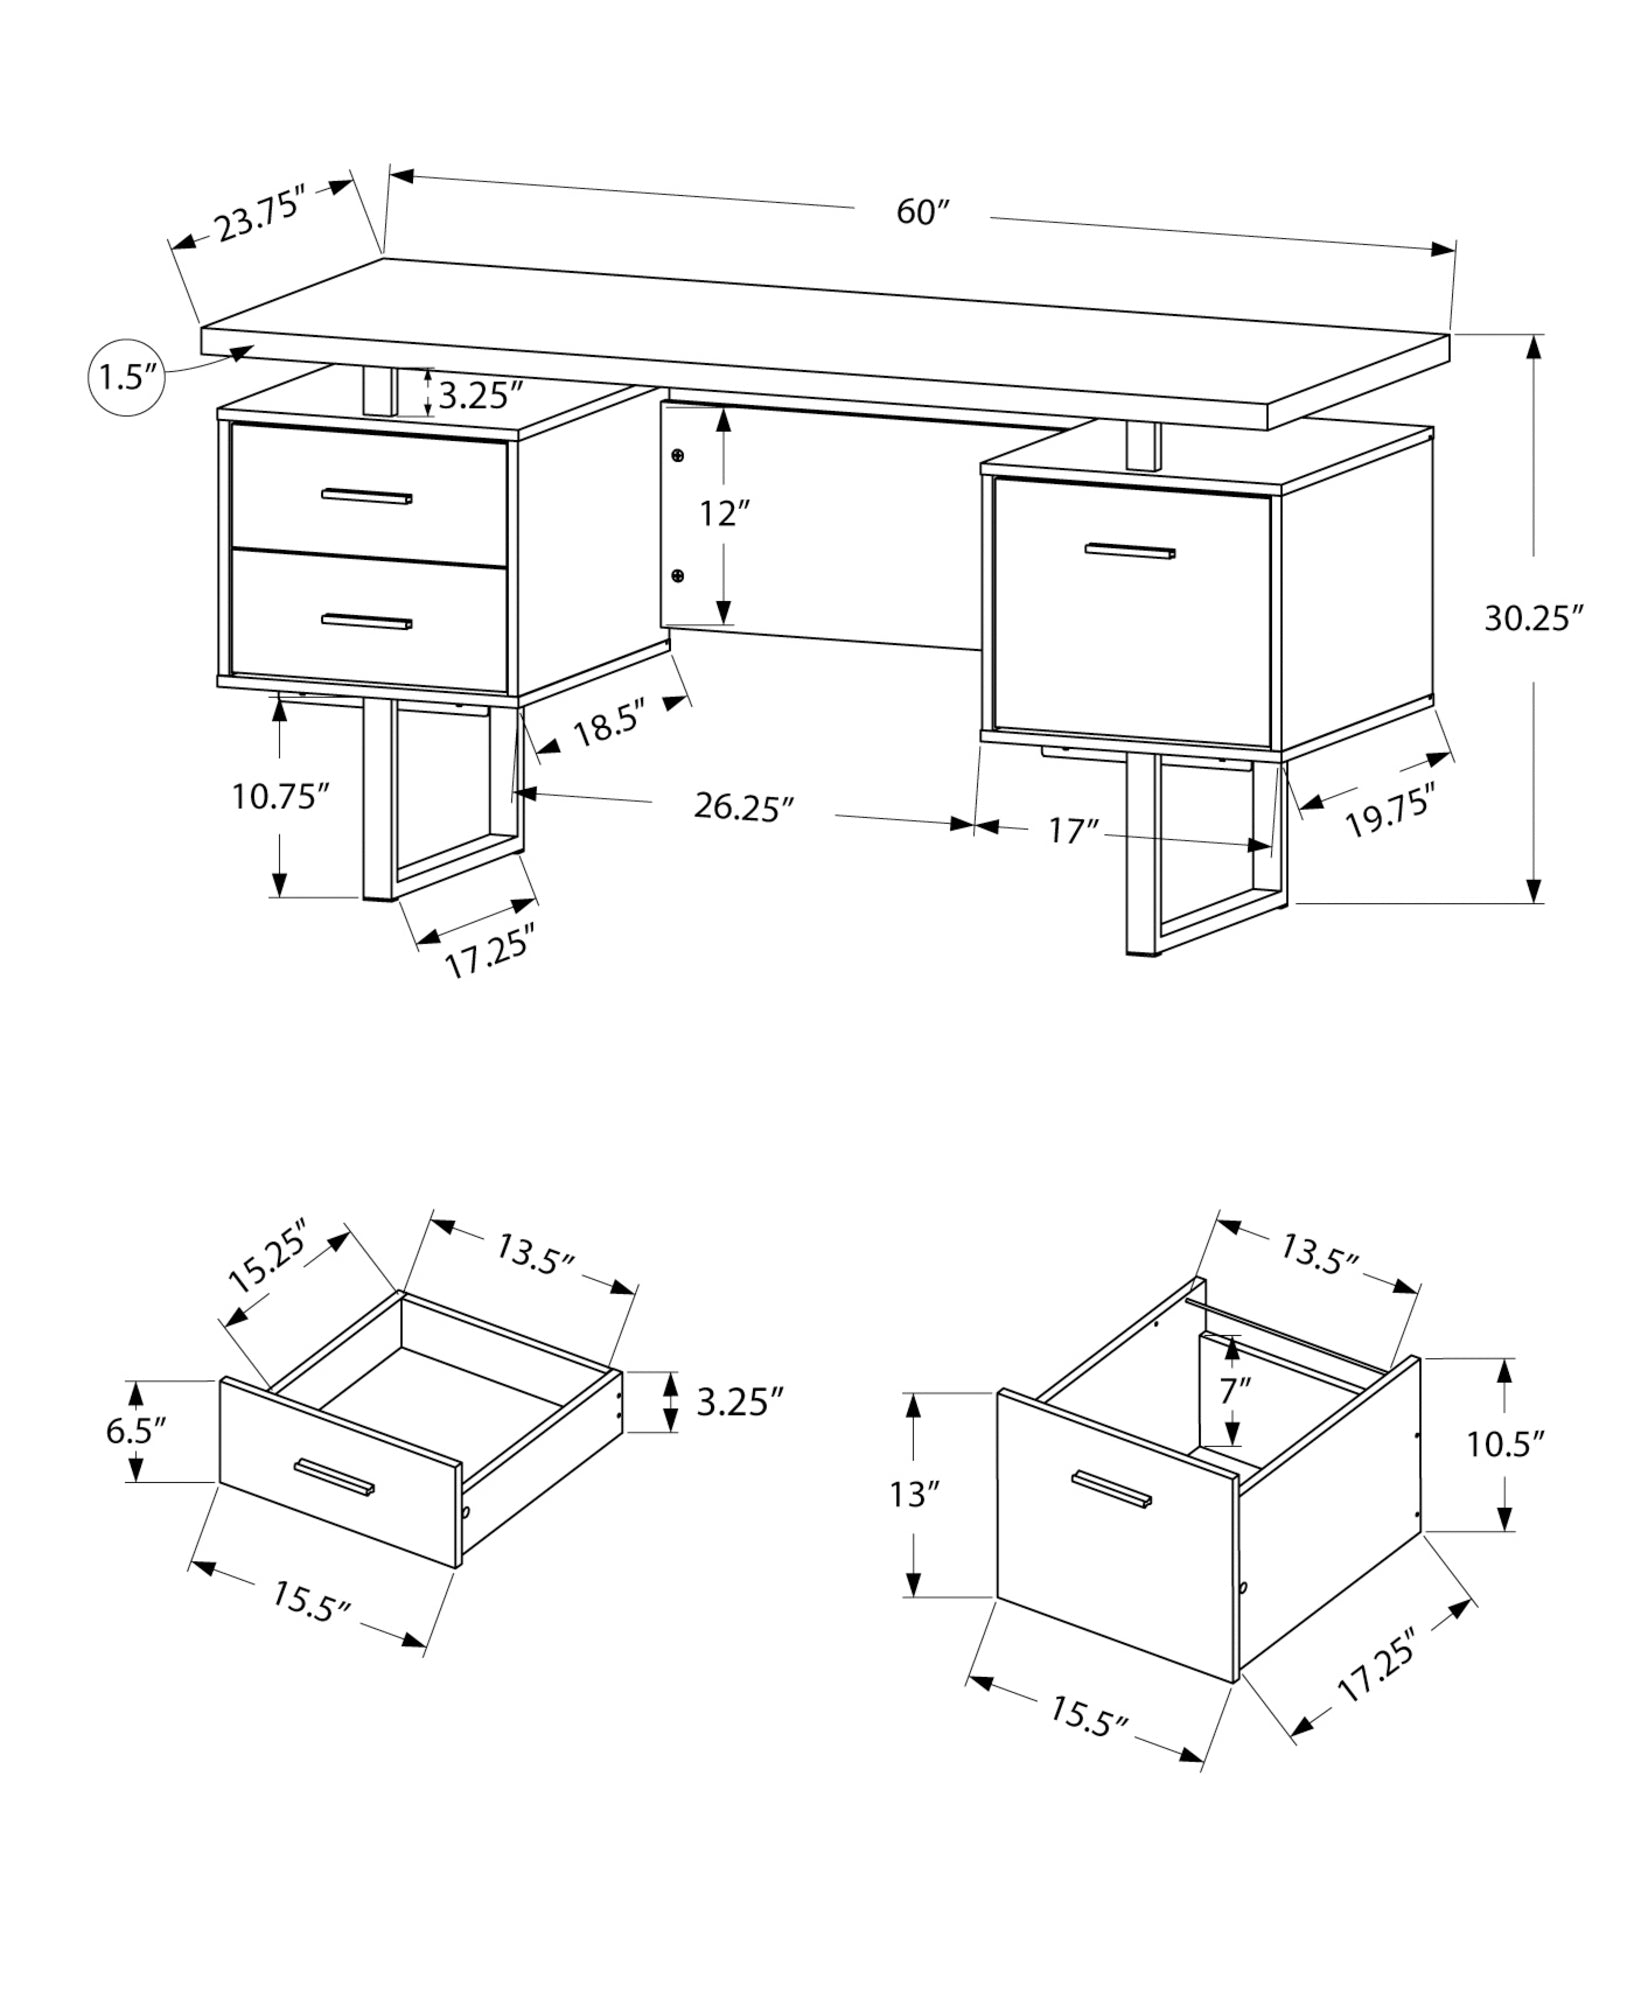 MN-387627    Computer Desk, Home Office, Laptop, Left, Right Set-Up, Storage Drawers, 60"L, Metal, Laminate, Light Reclaimed Wood, Black, Contemporary, Modern